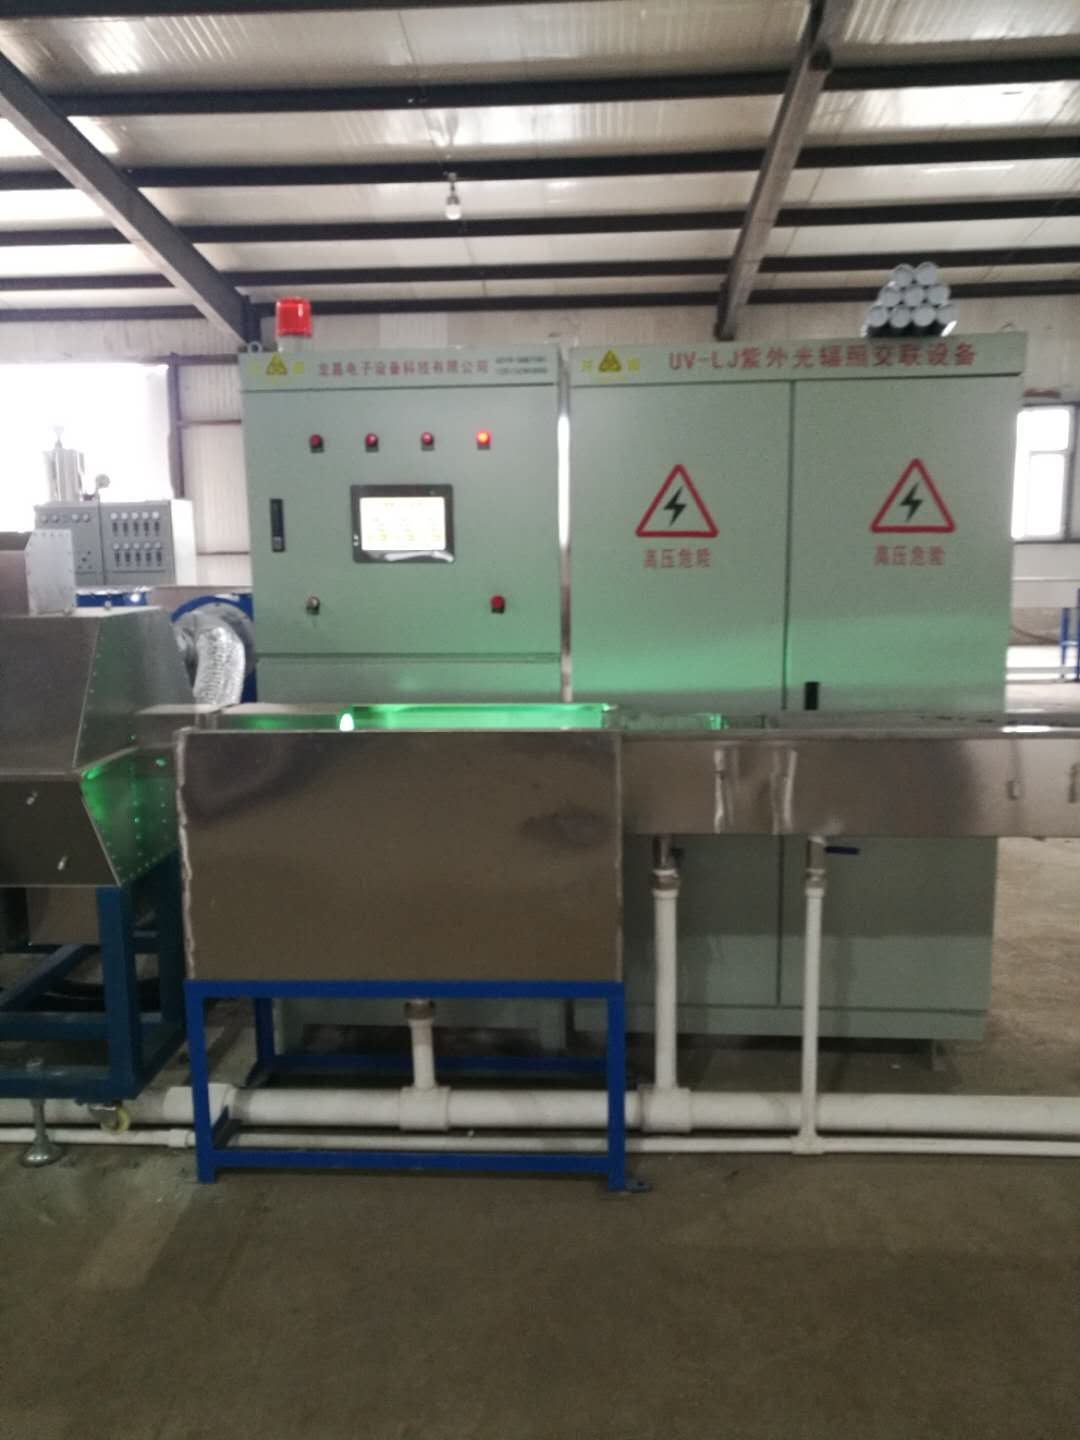 LSUV-LJ type ultraviolet irradiation cross - linking equipment in a cable factory